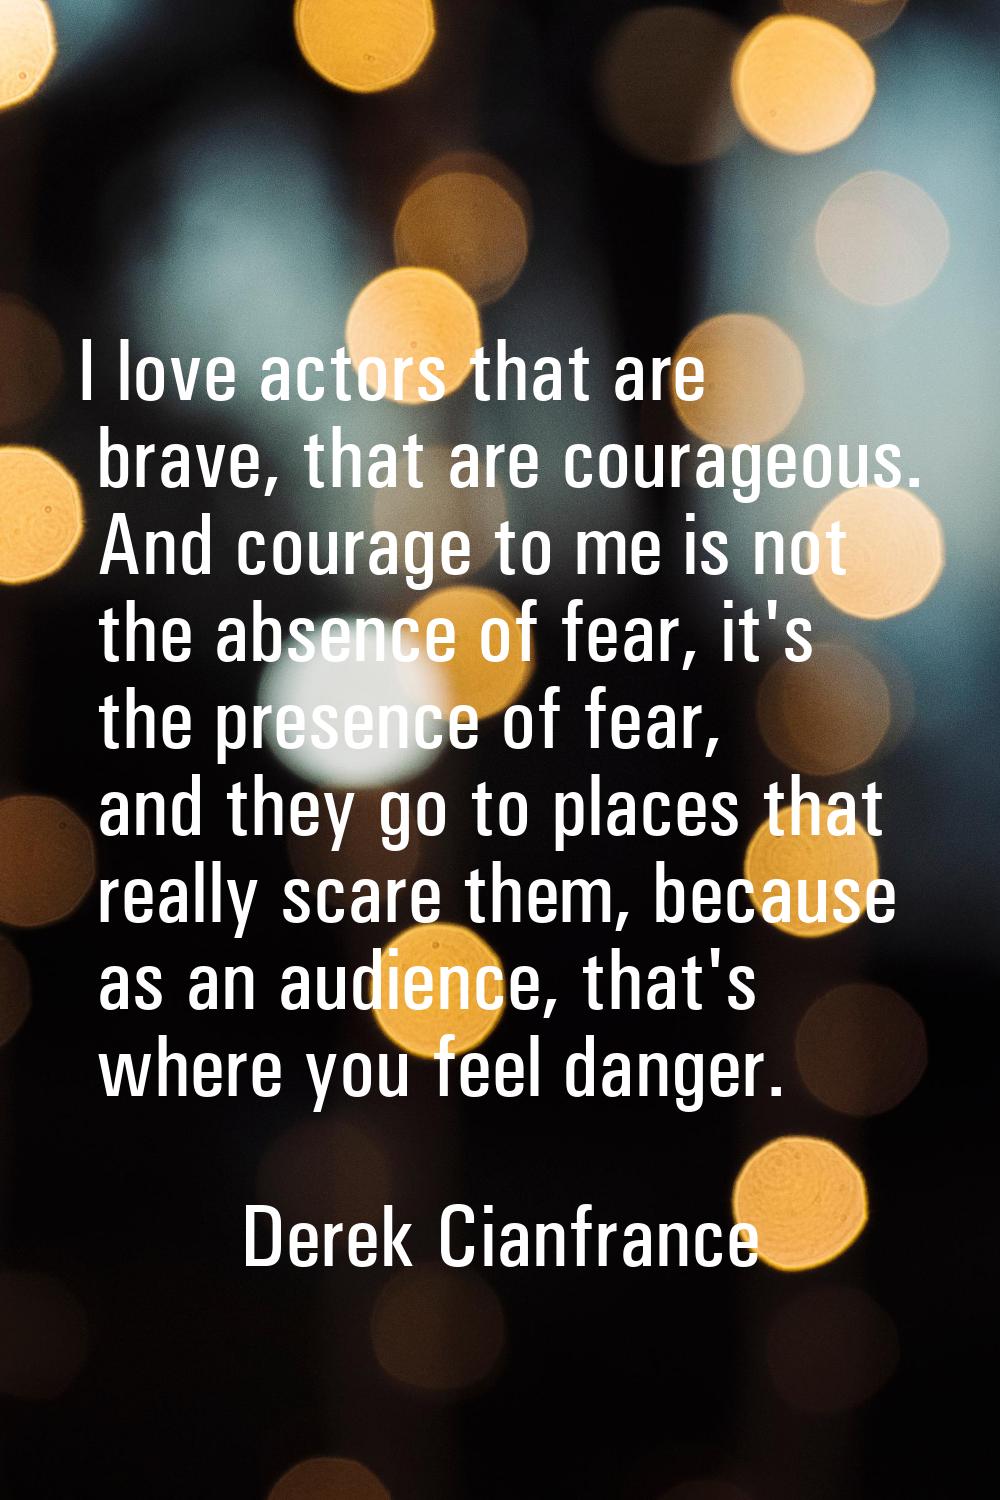 I love actors that are brave, that are courageous. And courage to me is not the absence of fear, it